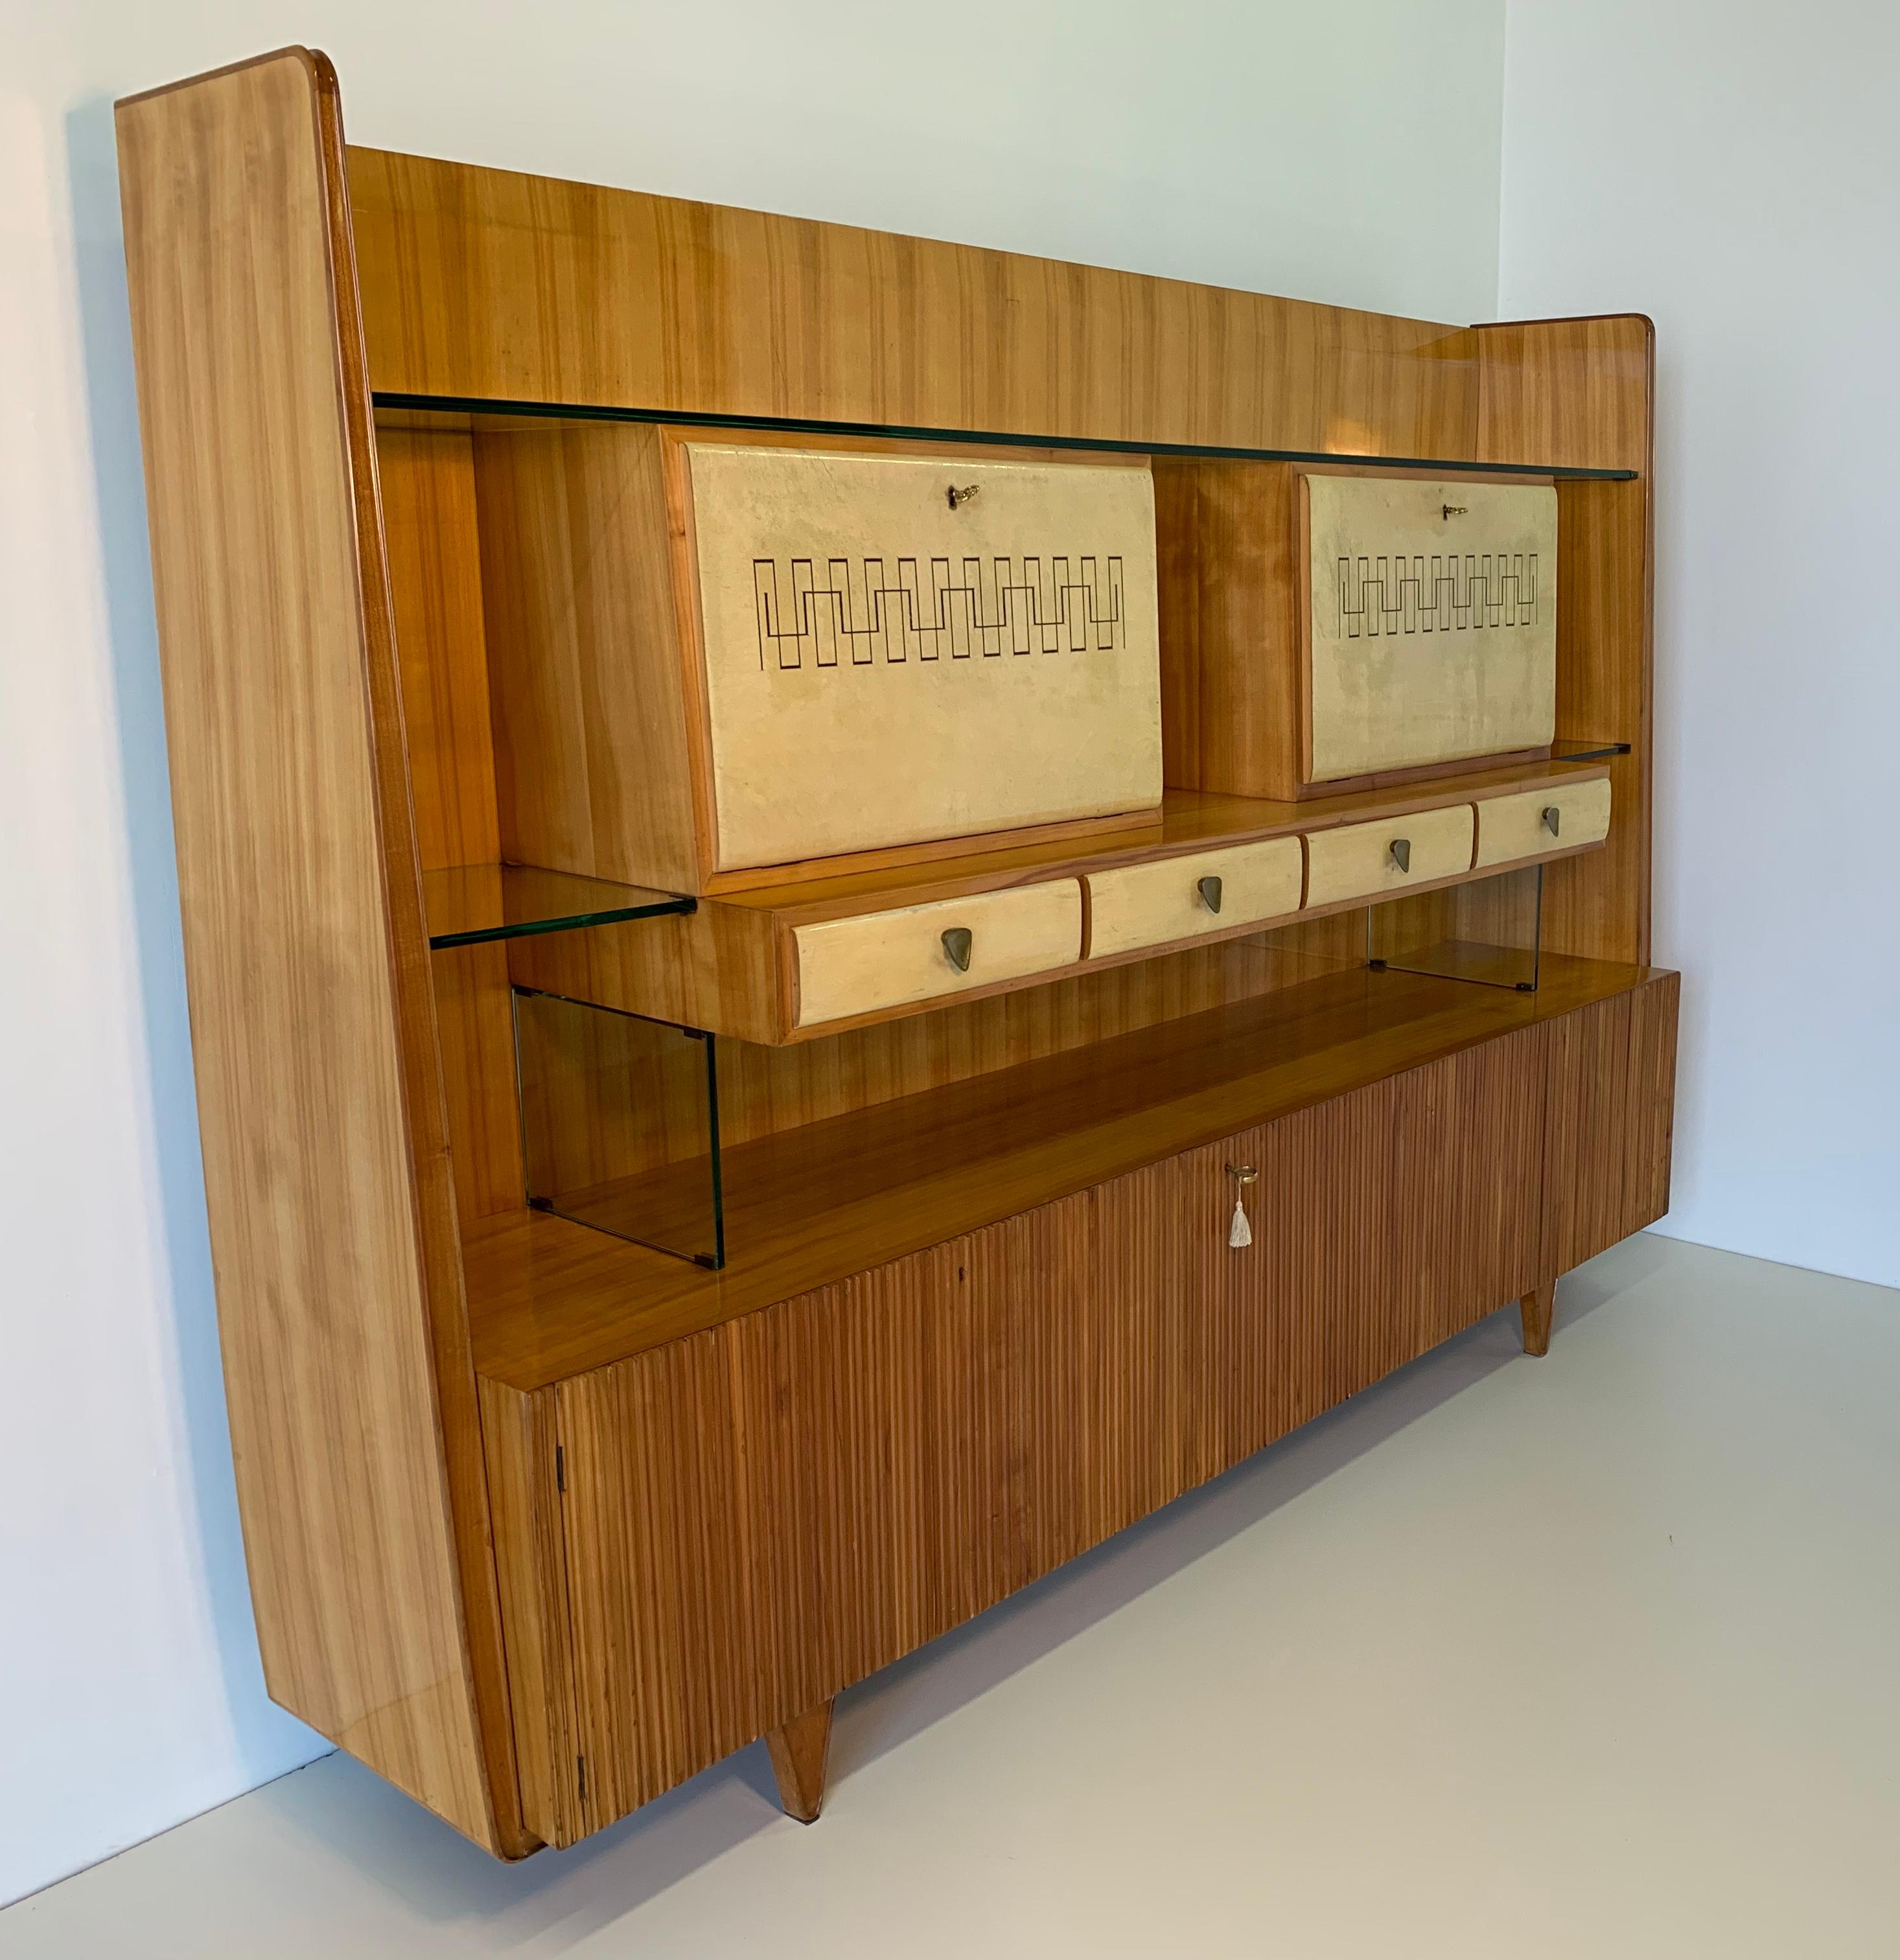 Rare high sideboard from the 1950s produced in Italy in Cantù by the company 'F.lli Cappelletti fu Natale' for the 'Permanente Mobili Cantù' most likely based on a design by Gio Ponti.
The whole piece of furniture is covered with cherrywood with